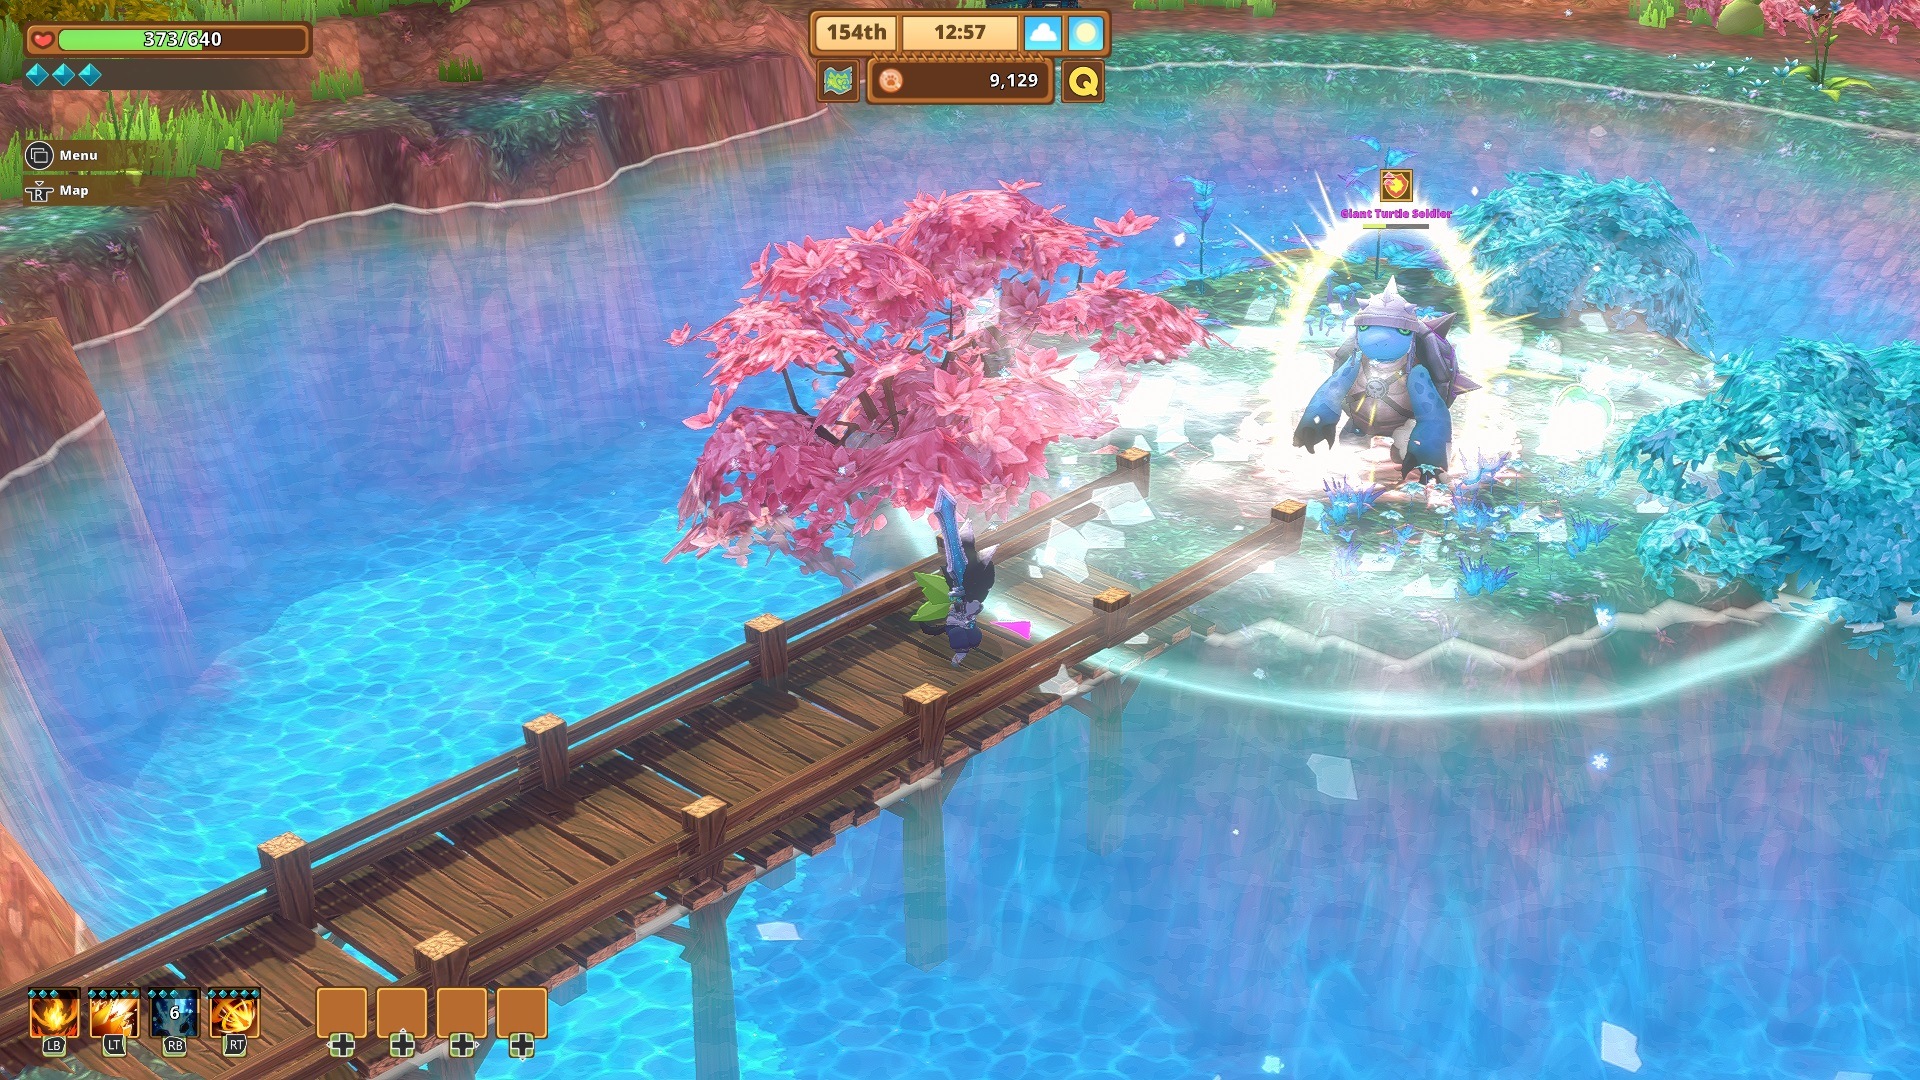 PQube Spielesoftware »Kitaria Fables«, PlayStation 4